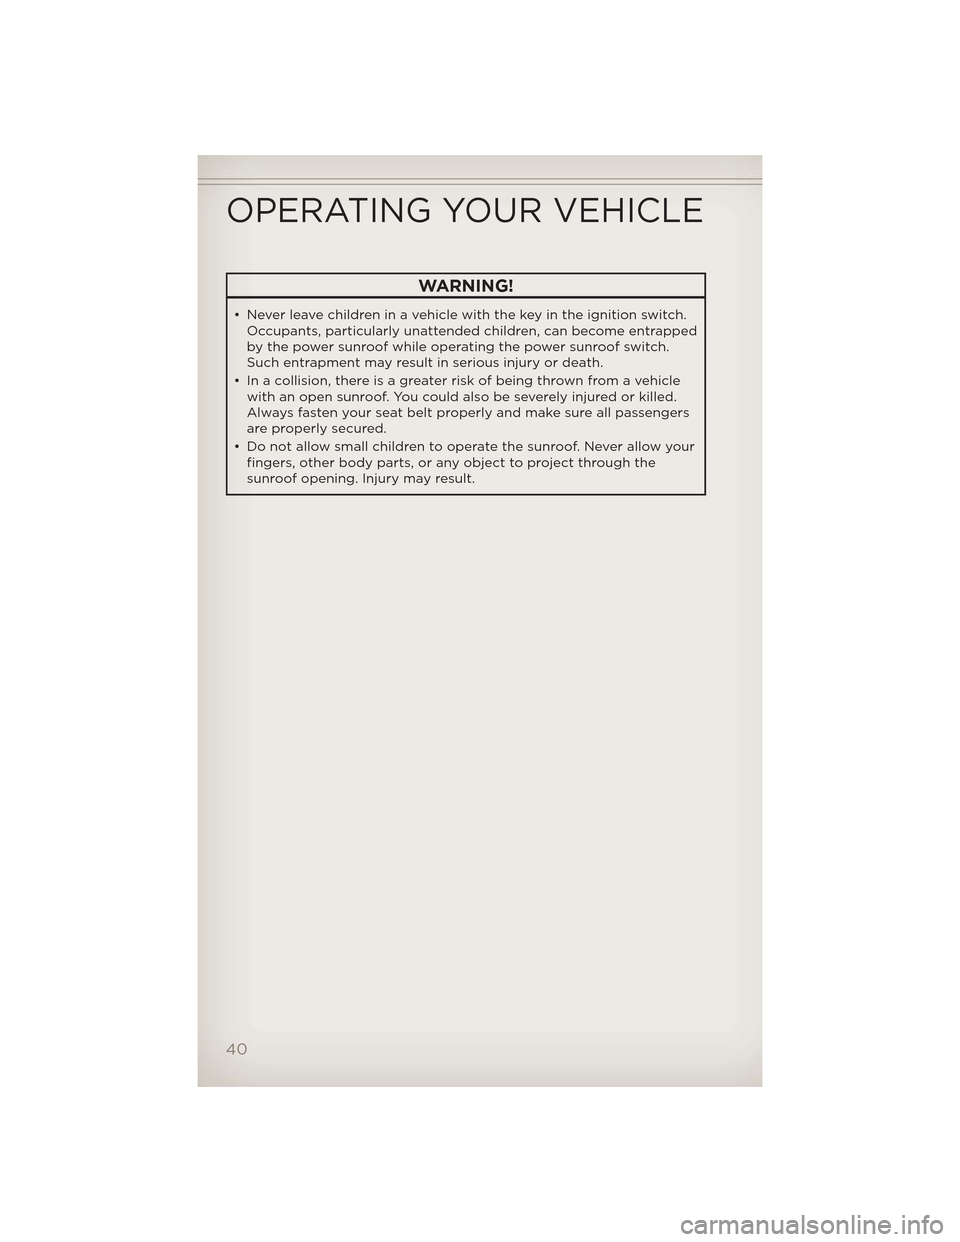 JEEP GRAND CHEROKEE 2012 WK2 / 4.G User Guide WARNING!
• Never leave children in a vehicle with the key in the ignition switch.Occupants, particularly unattended children, can become entrapped
by the power sunroof while operating the power sunr